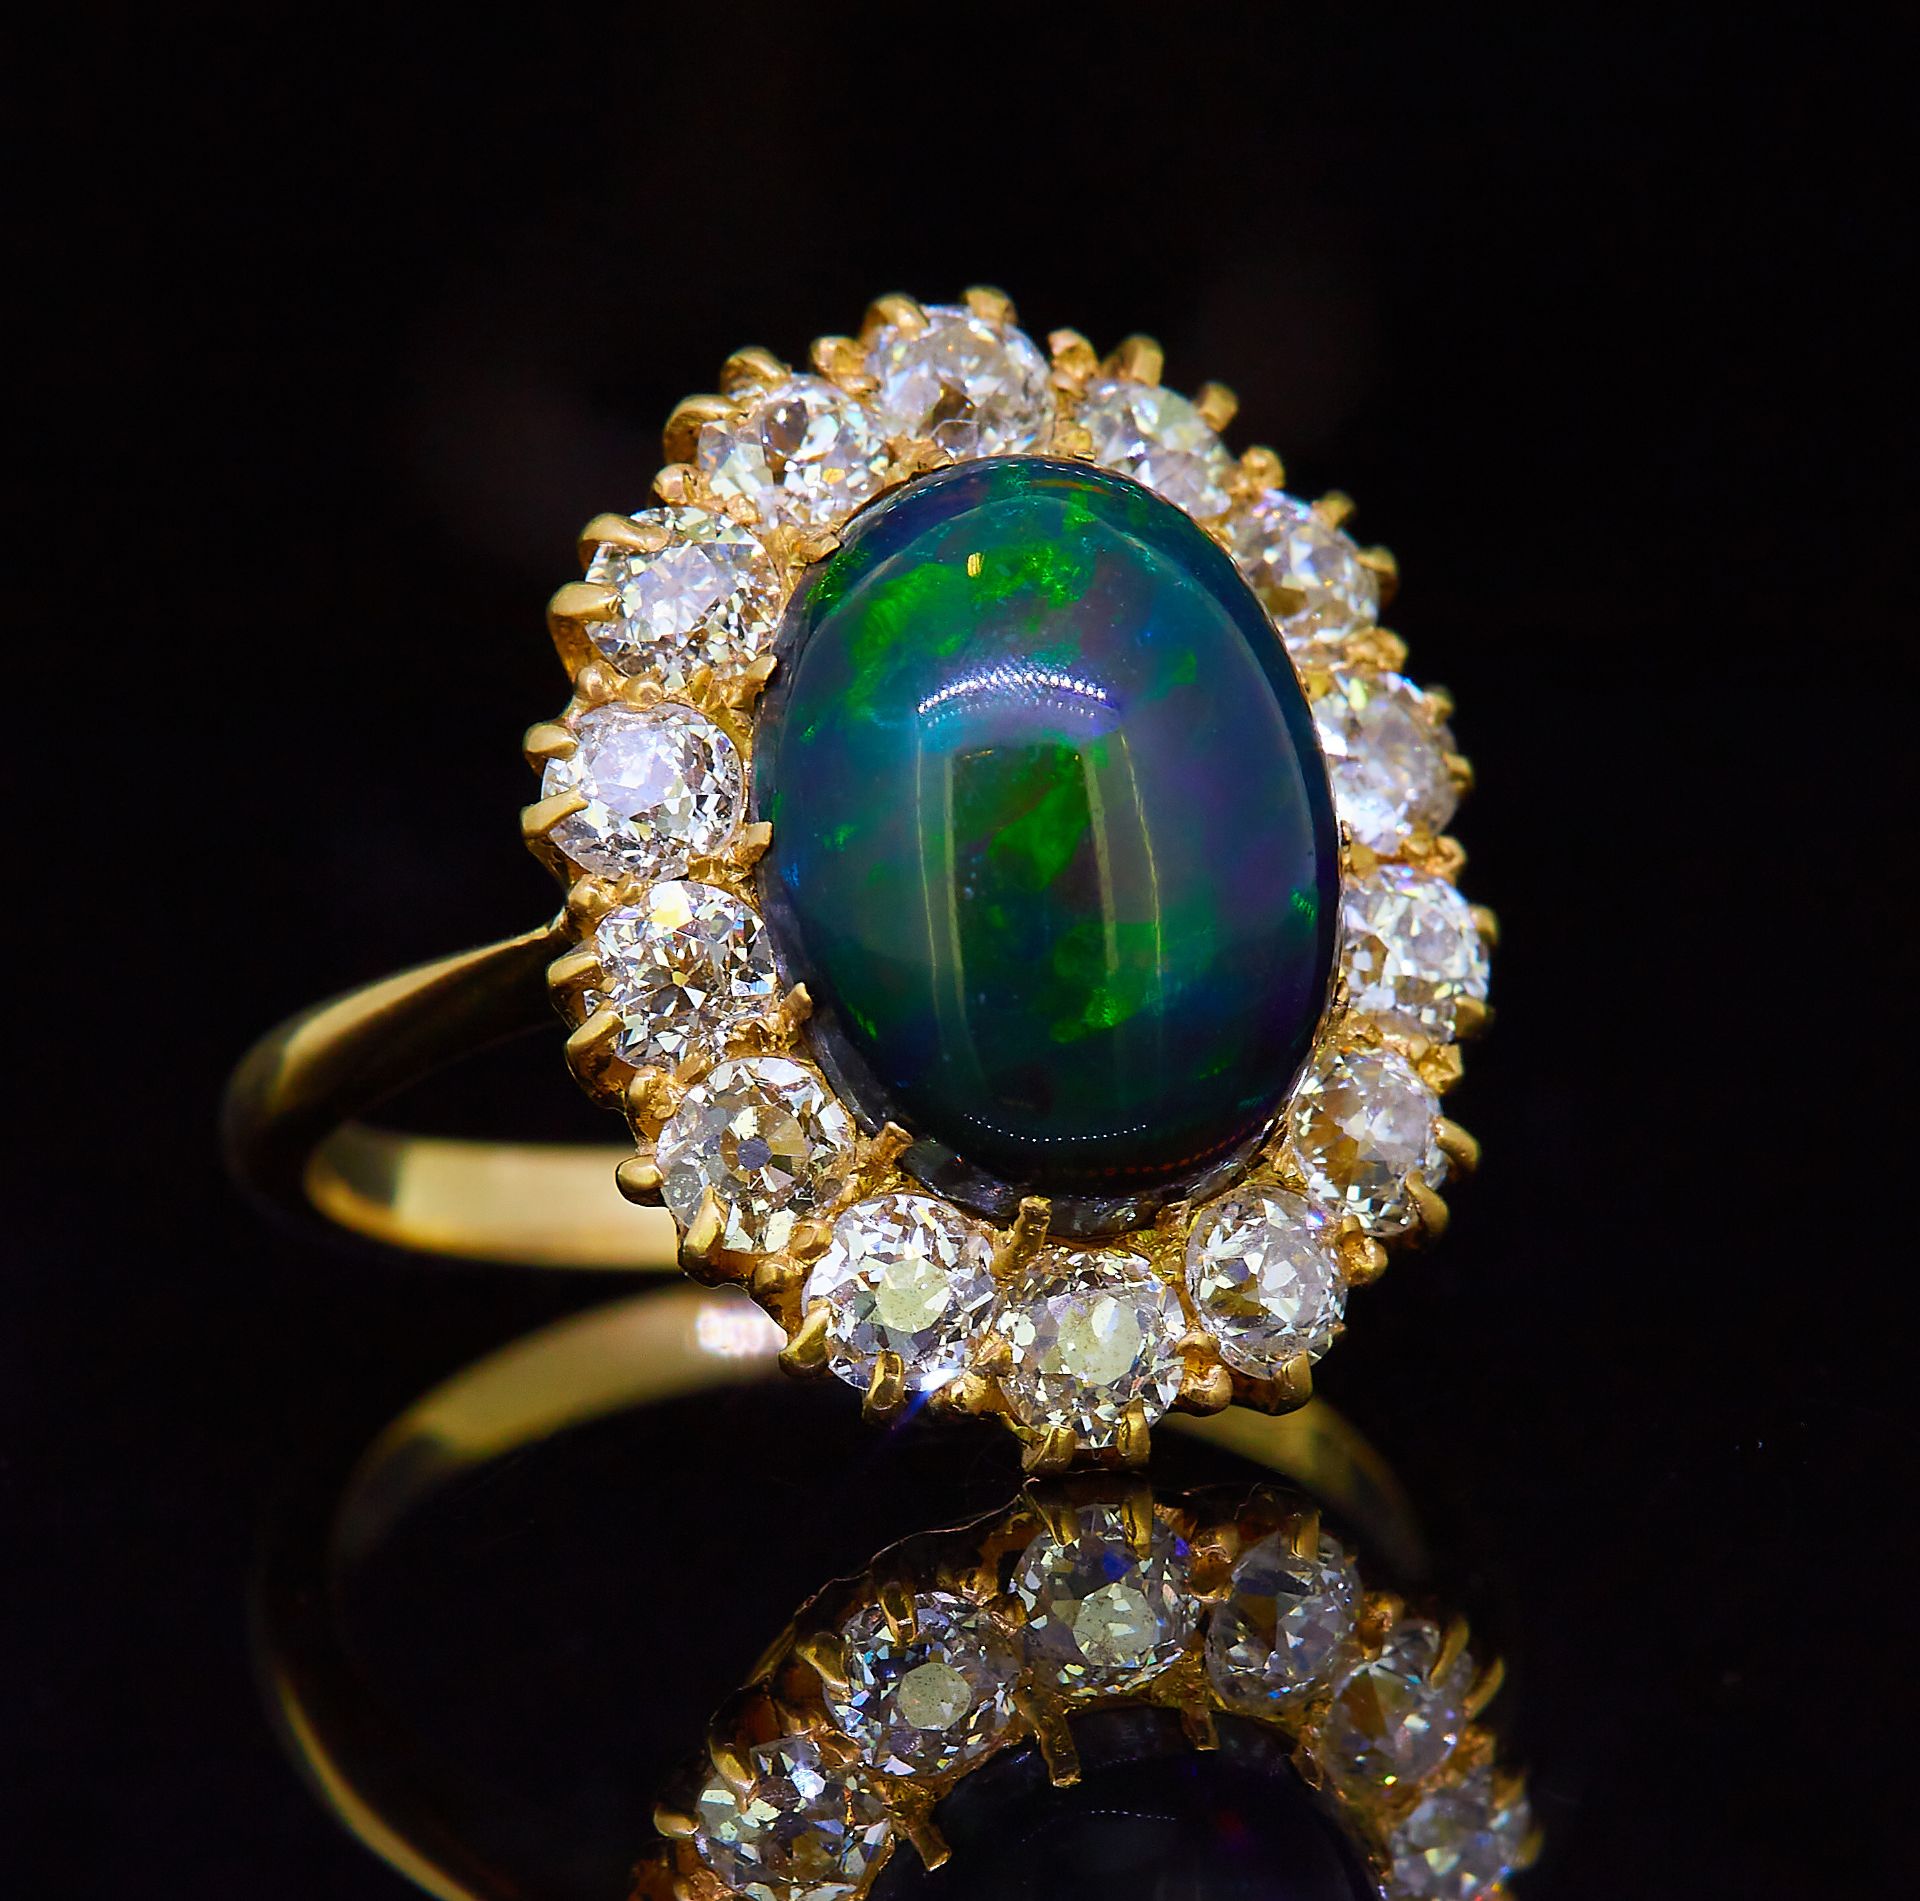 BLACK OPAL AND DIAMOND CLUSTER RING